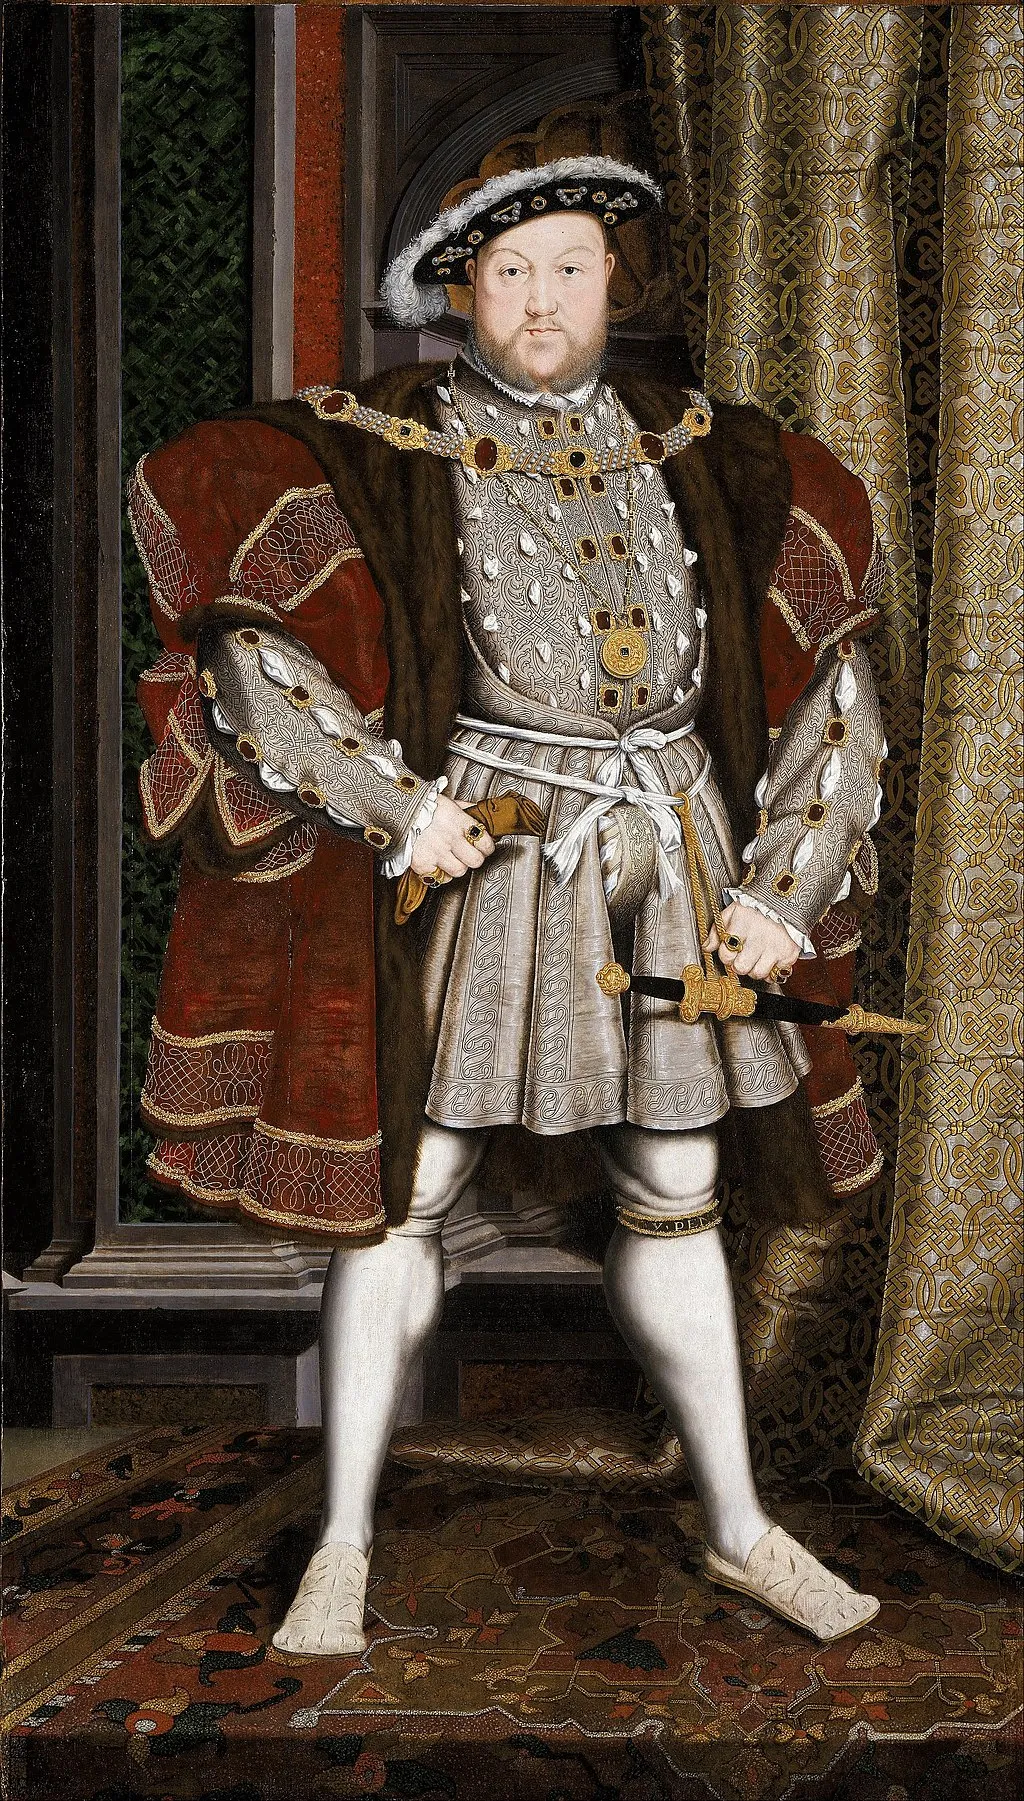 A portrait of Henry VIII, based on an original by Hans Holbein the Younger